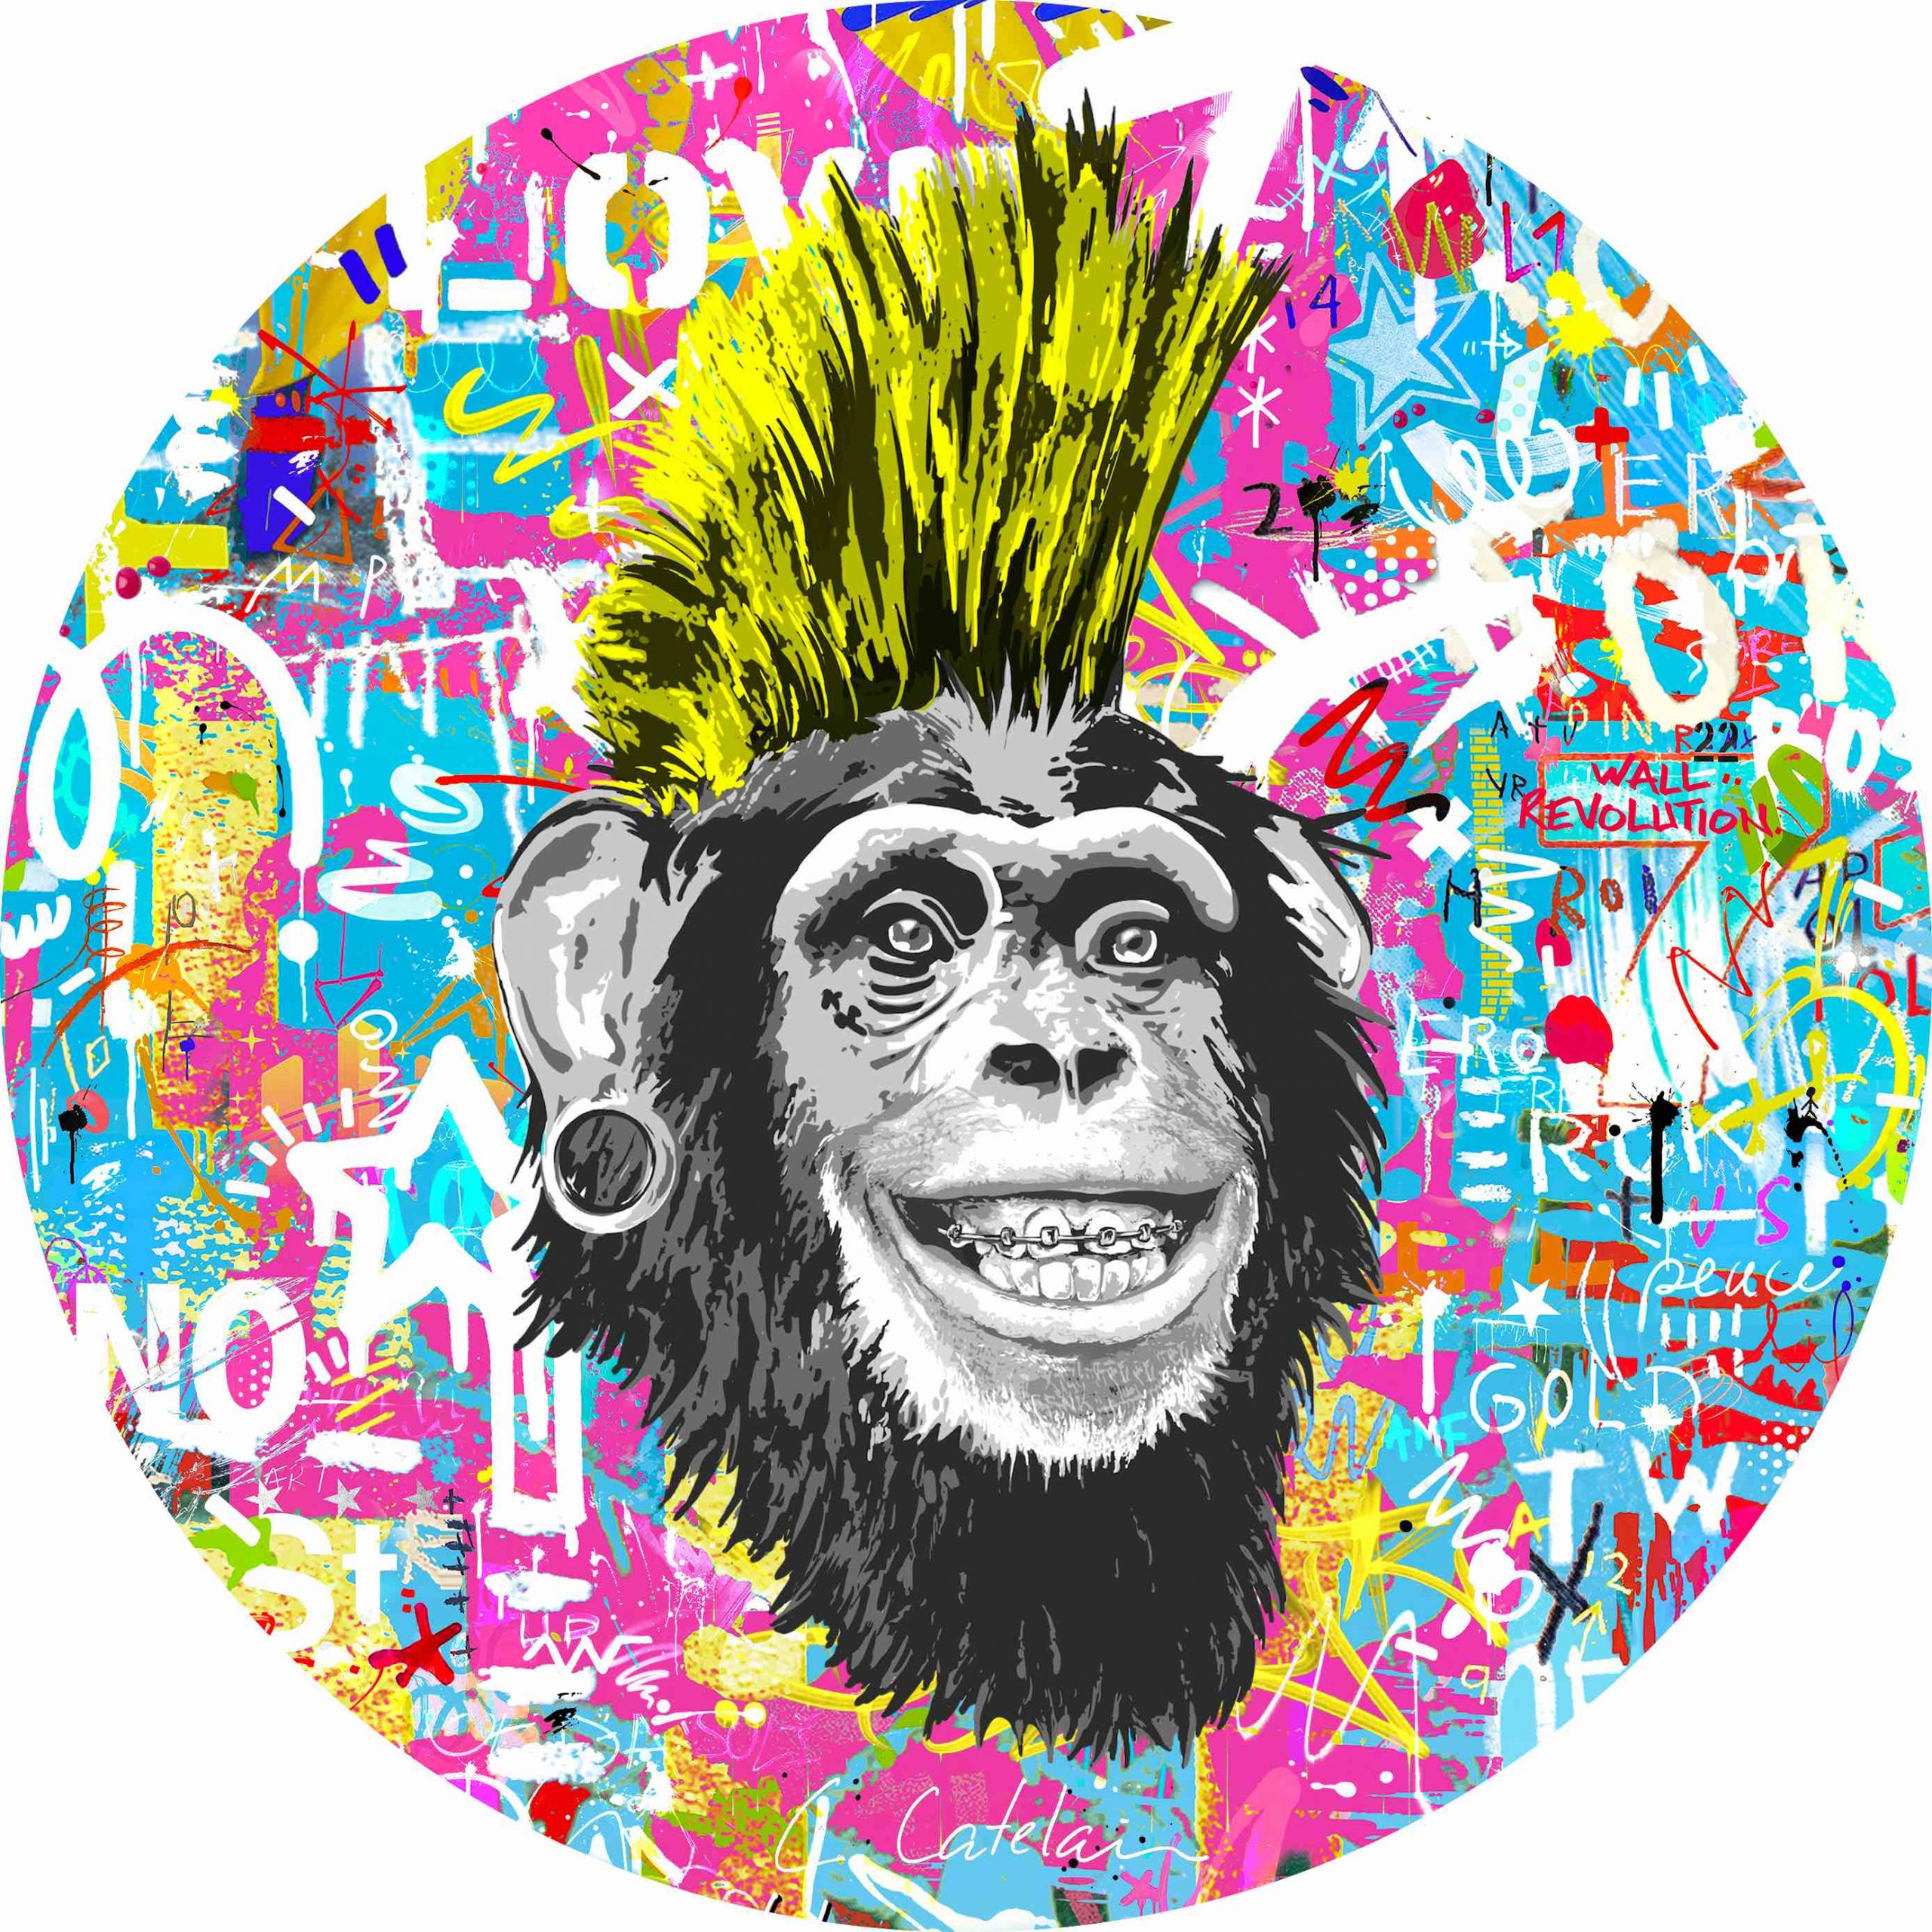 Collection Plexi MONKEY Yellow, Photographic print under plexiglass available in limited edition on the street art artist C.Catelain official website. Size 30x30 Round. Original work